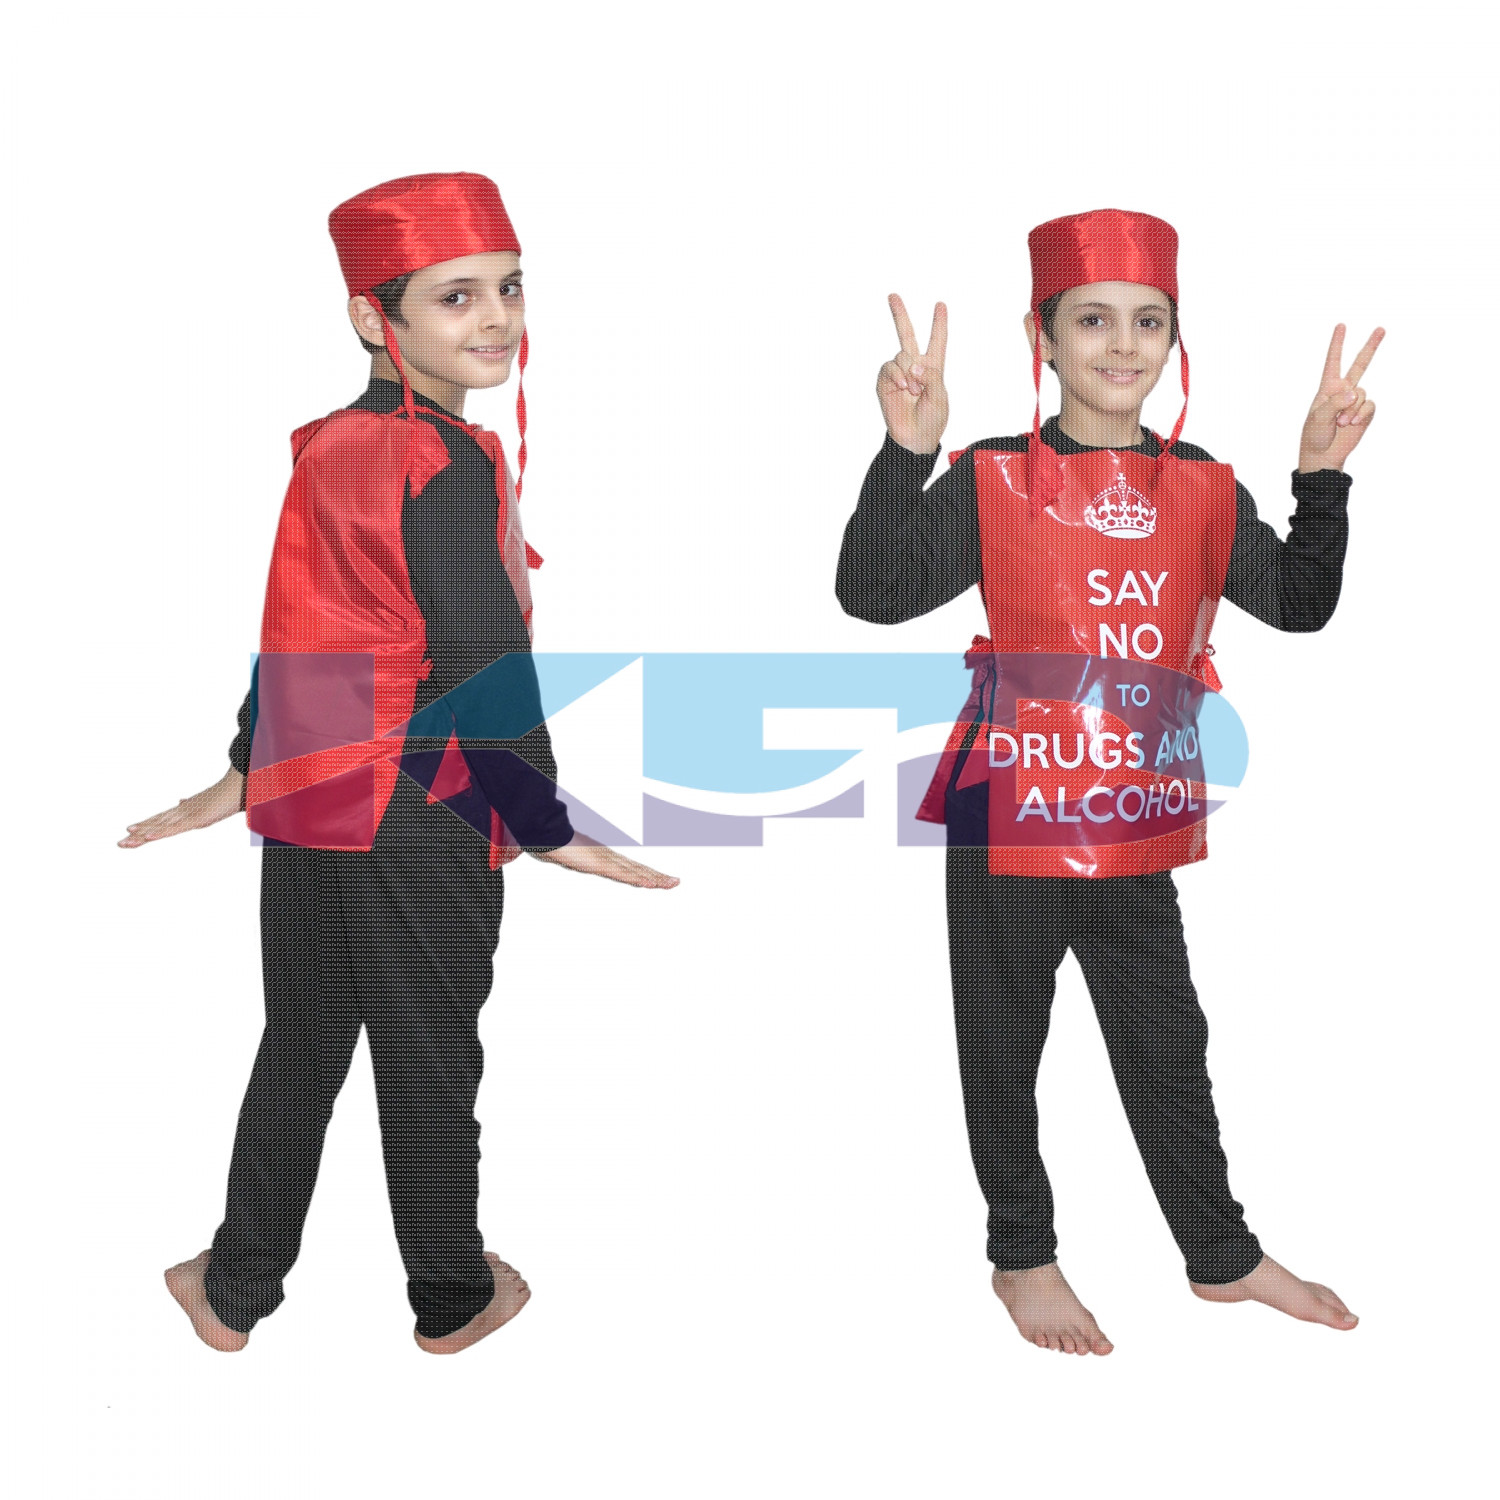 Say No To Drugs and Alcohol fancy dress for kids,Object Costume for School Annual function/Theme Party/Competition/Stage Shows Dress